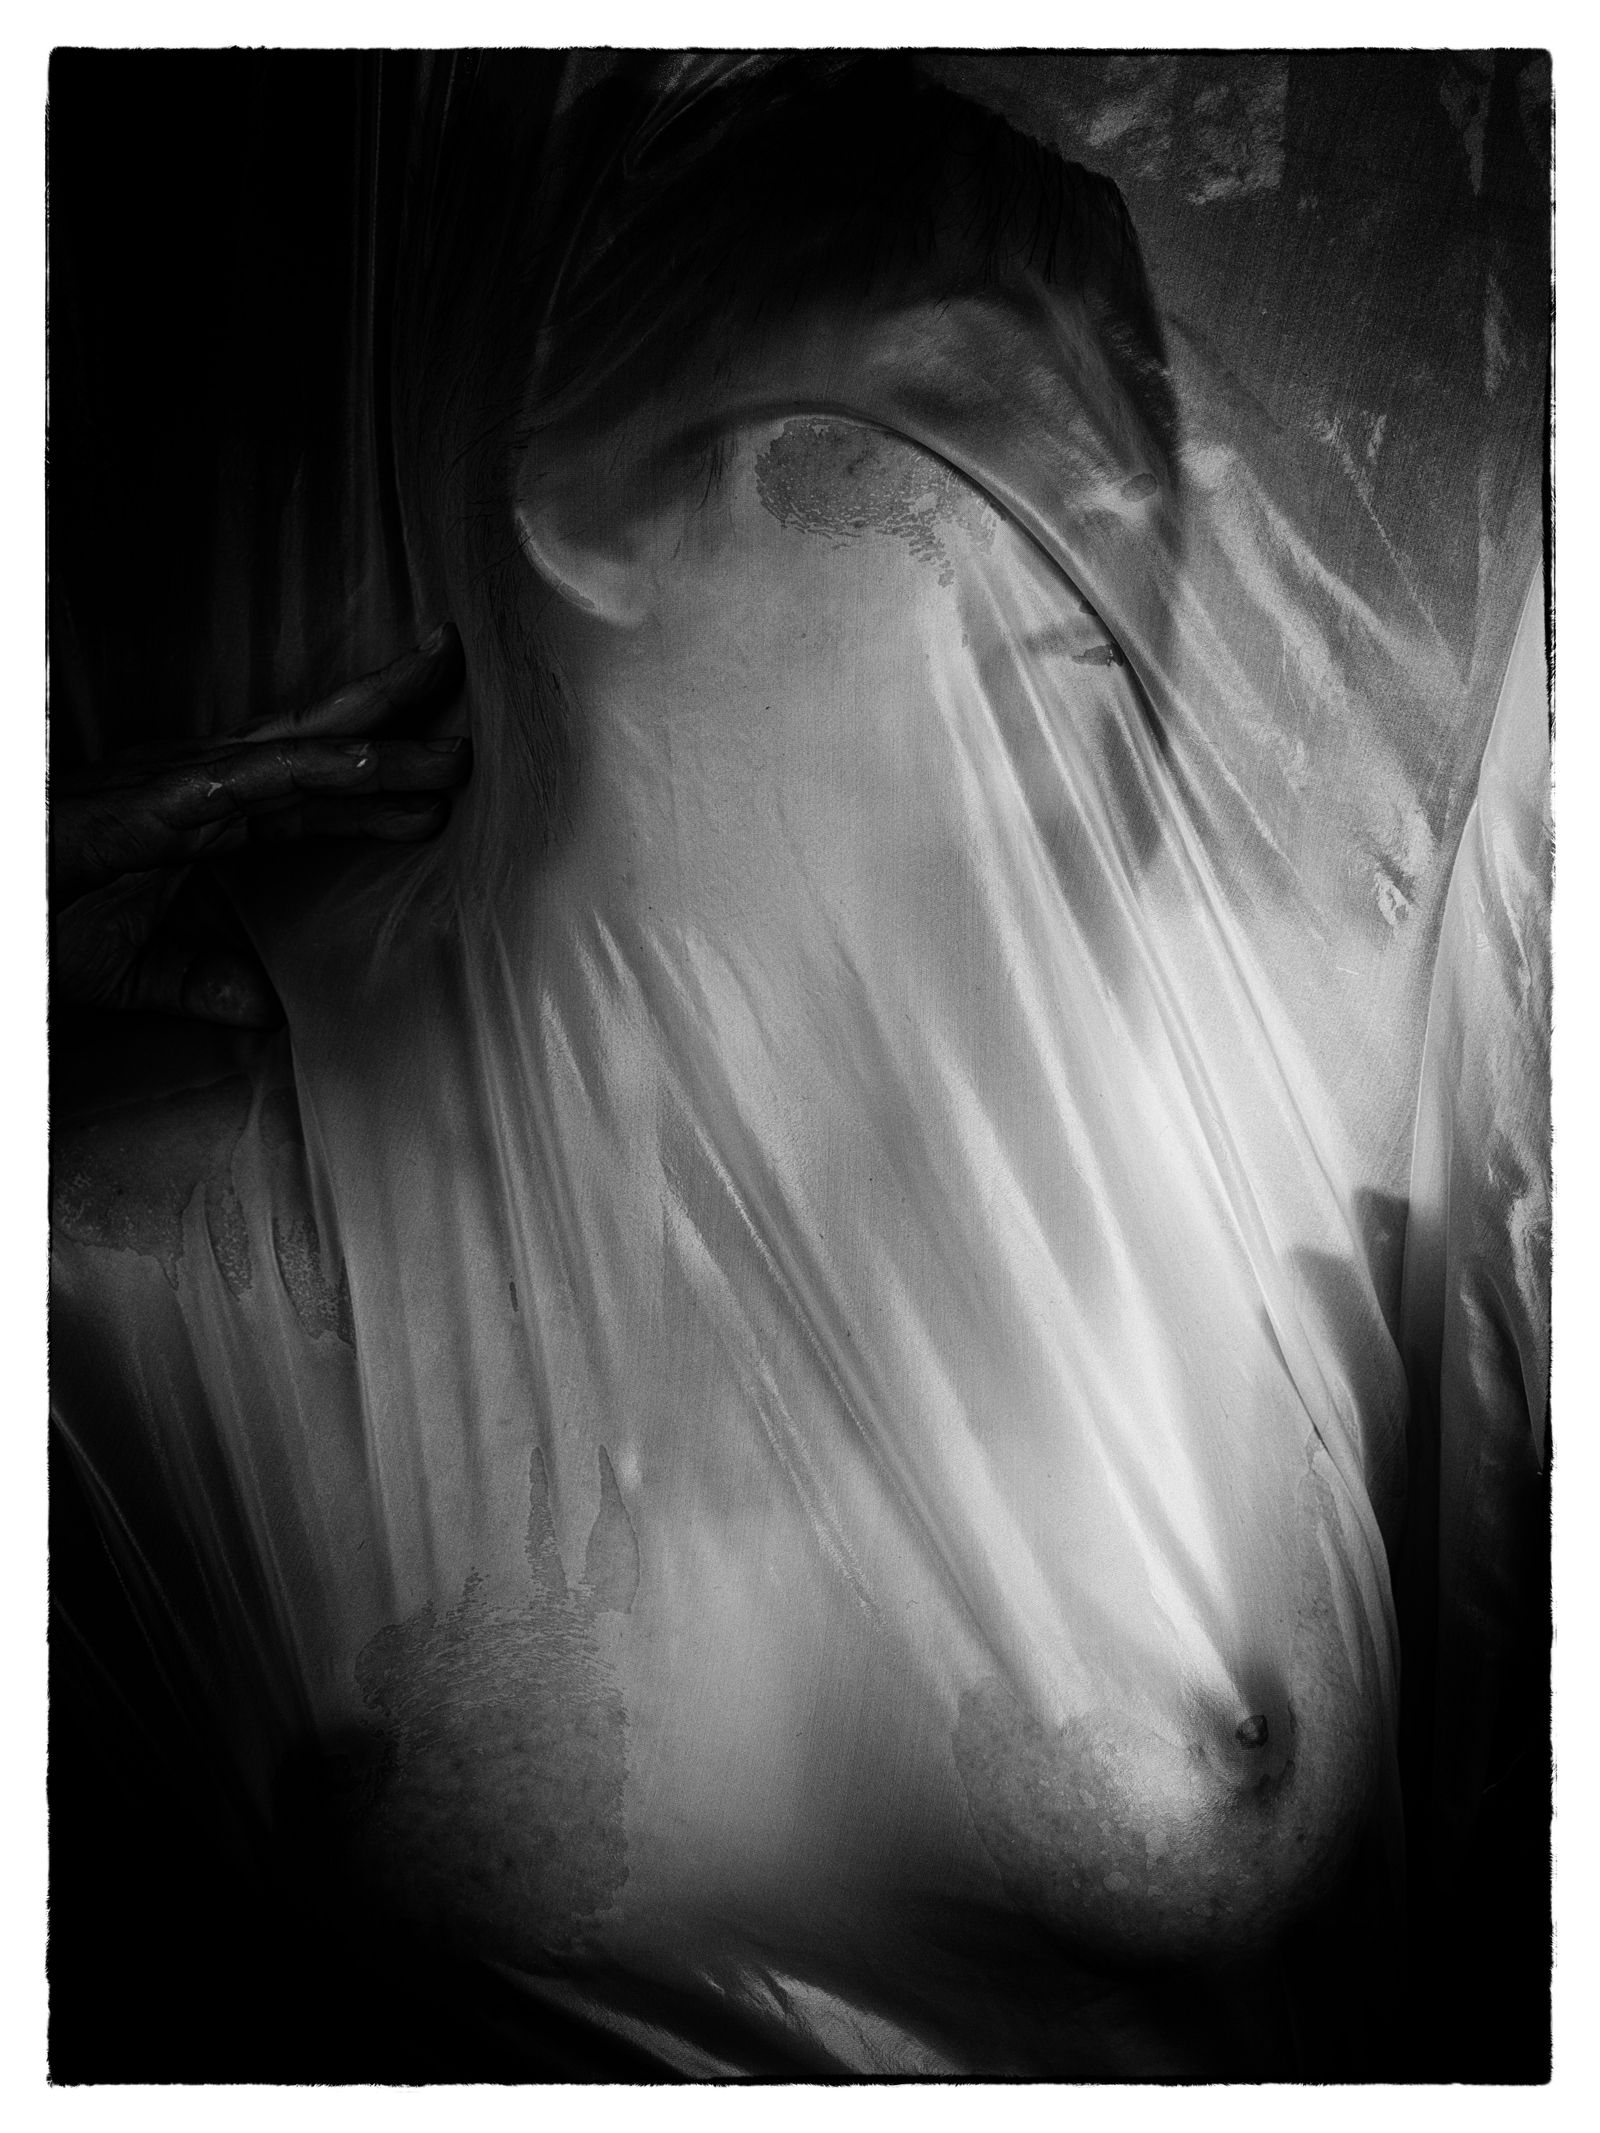 © Jay Keim - Image from the Wet Silk photography project